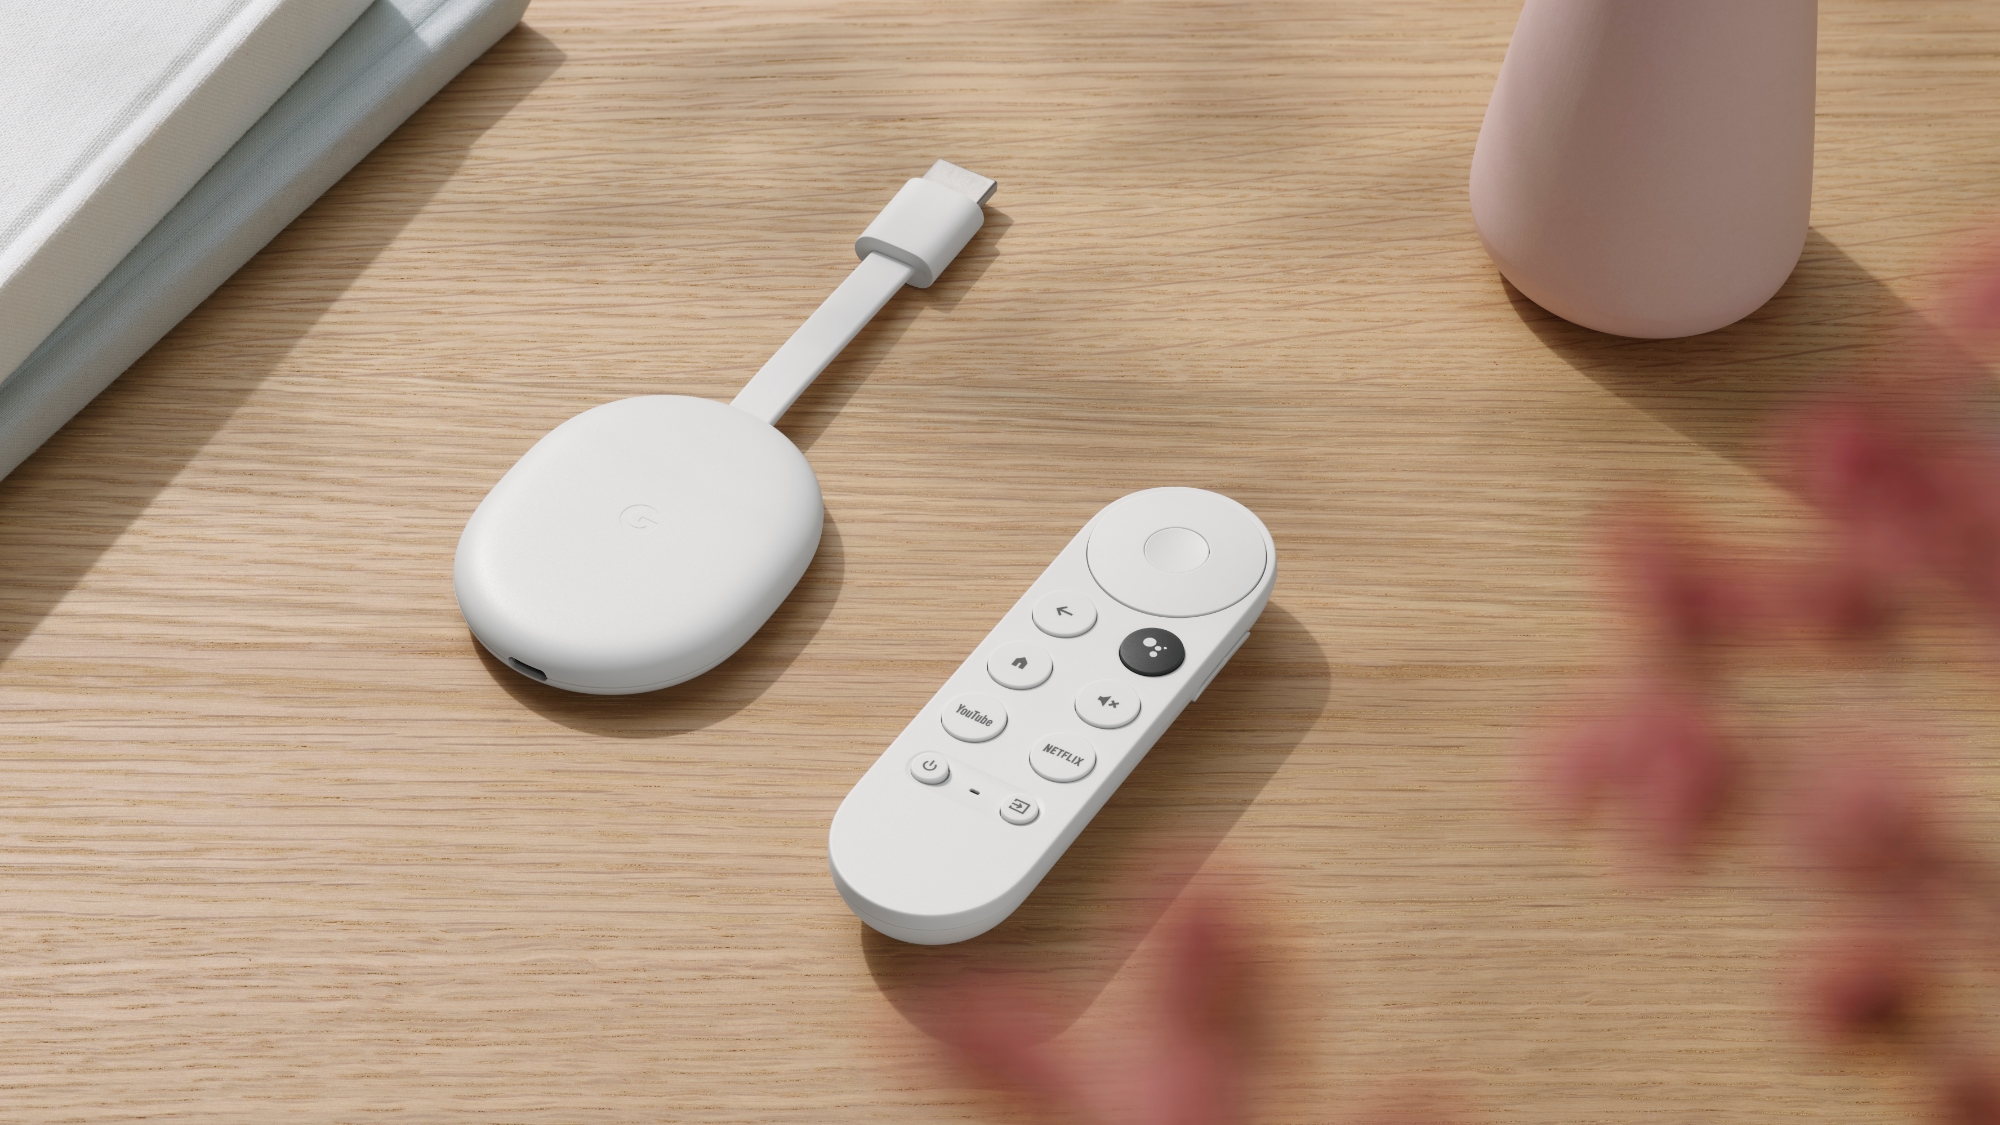 Google's new Chromecast costs $30 вЂ” and it has a remote TechCrunch